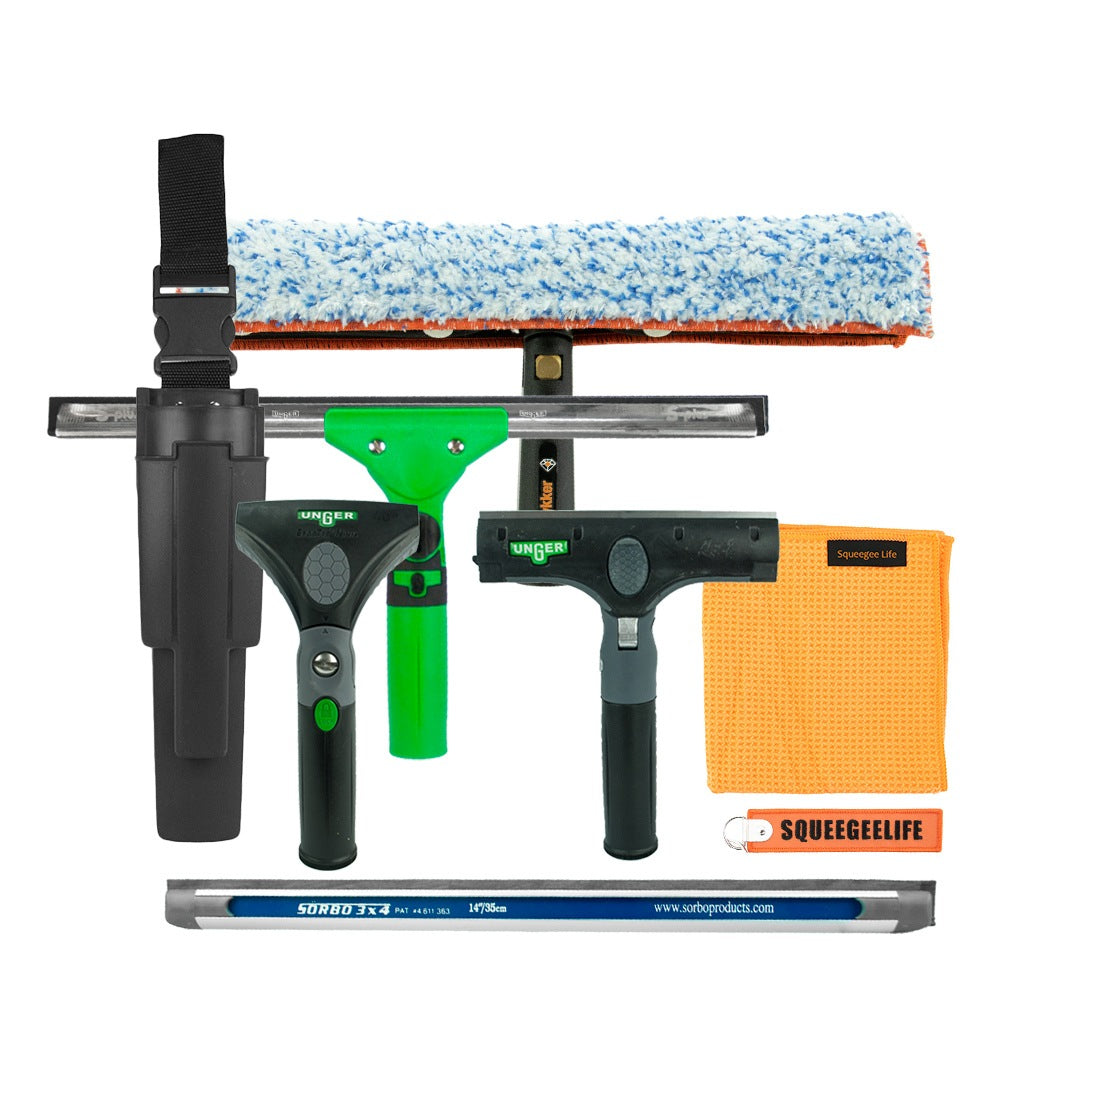 Squeegee Life Starter Kit Product View